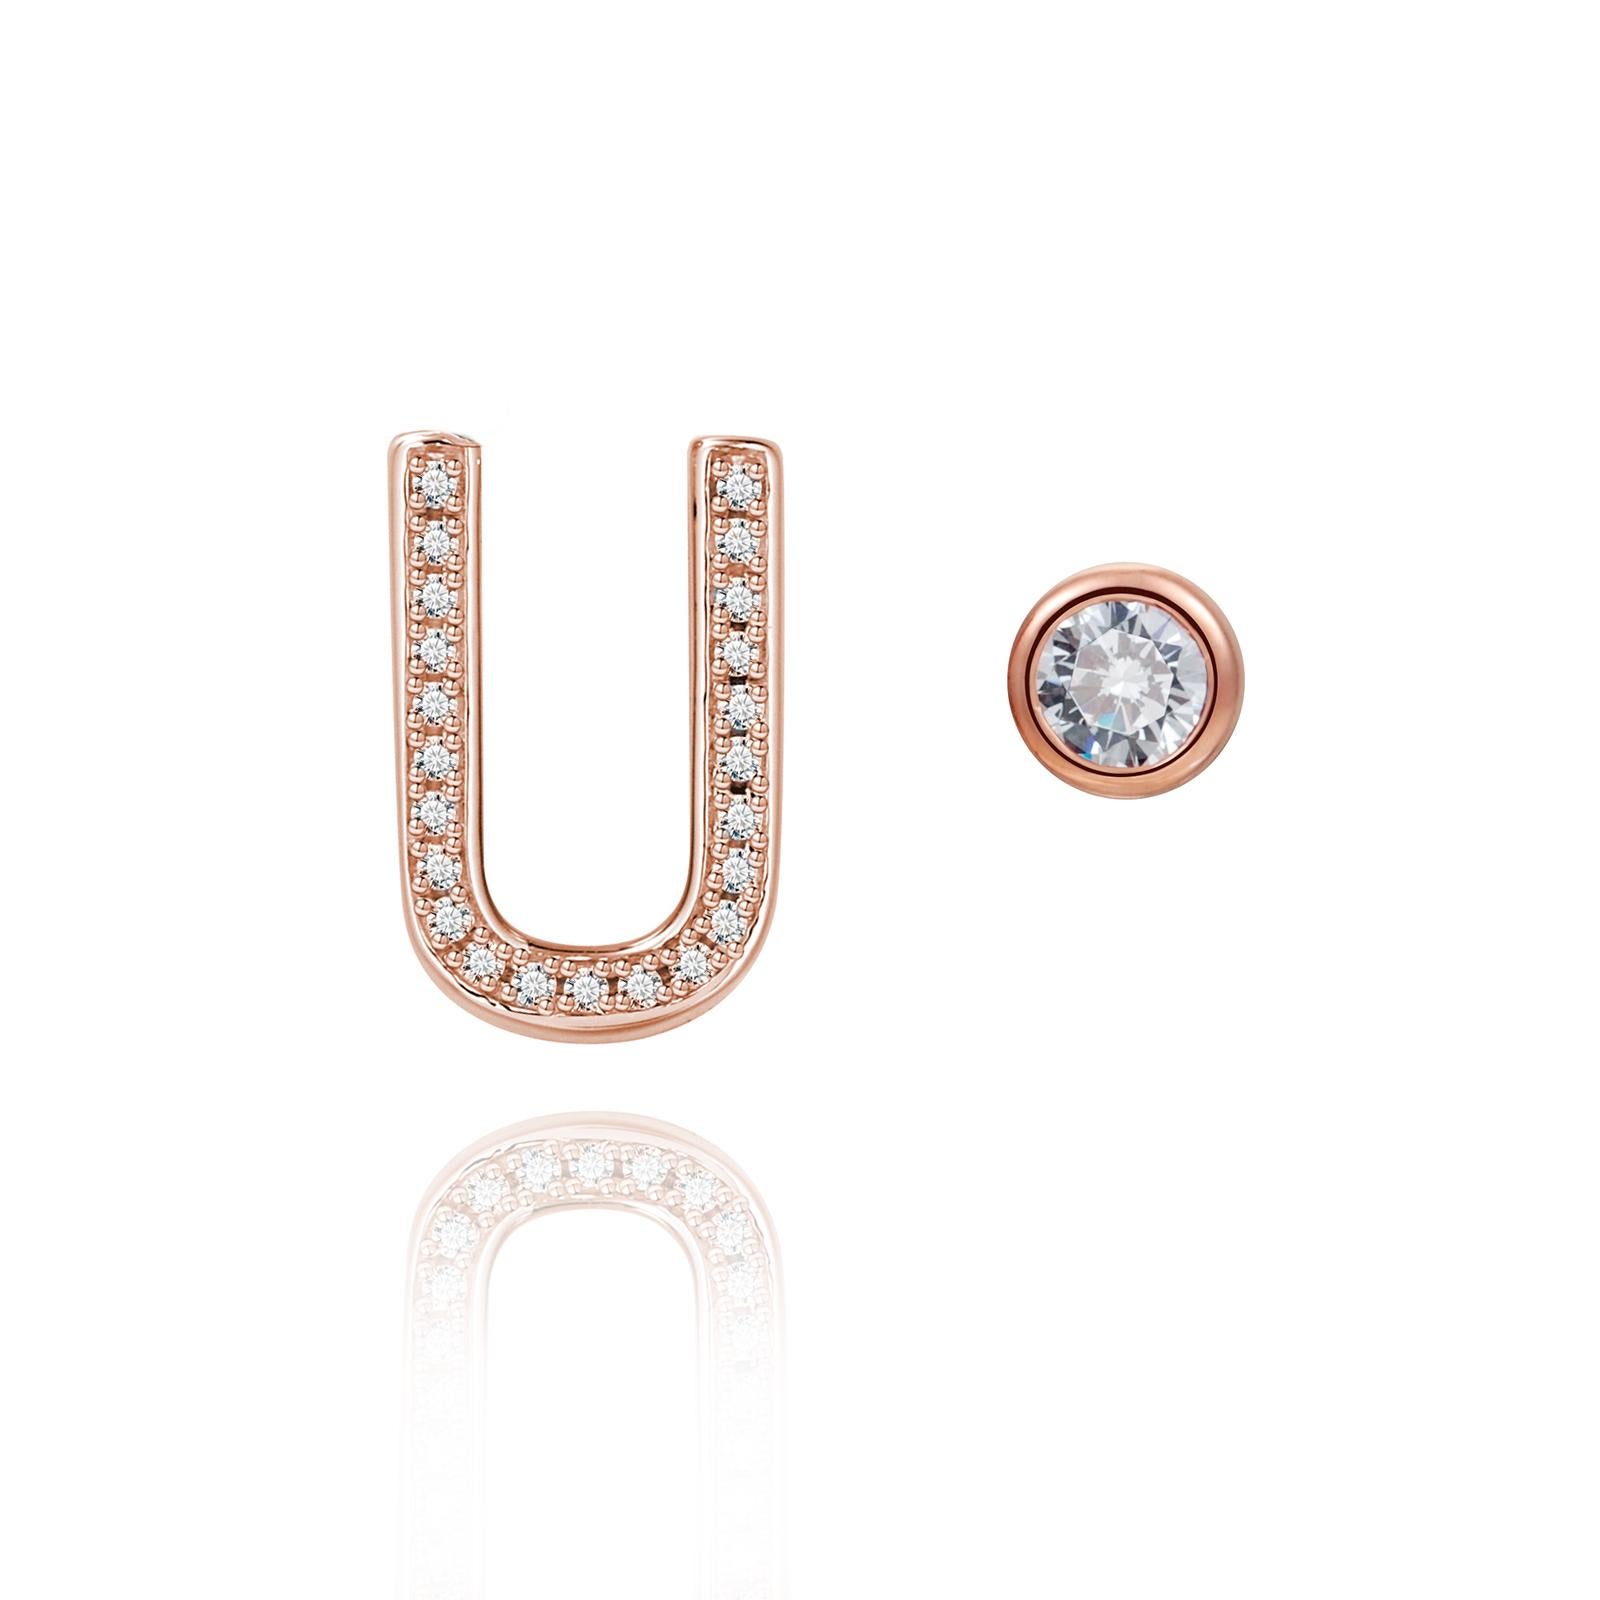 Nothing says YOU more than YOU. You are unique. You are bold.  You're not afraid to share who you are.  These initial bezel mismatched earrings tell the brilliant story of YOU. .925 sterling silver base also available in 24k yellow or rose gold